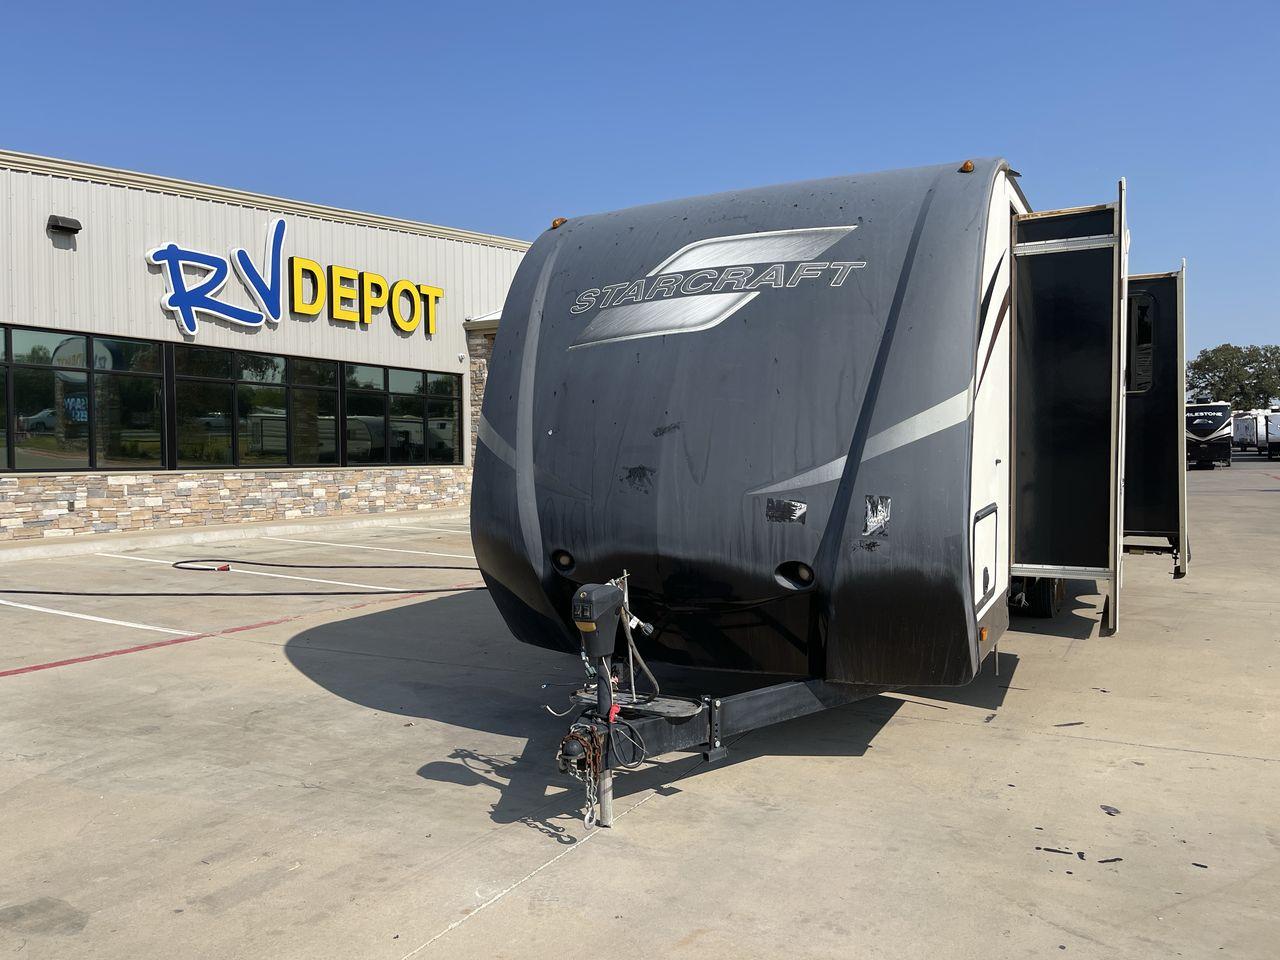 2015 STARCRAFT TRAVEL STAR 286RLWS (1SABS0BR2F2) , Length: 33.25 ft. | Dry Weight: 6,630 lbs. | Gross Weight: 9,000 lbs. | Slides: 2 transmission, located at 4319 N Main Street, Cleburne, TX, 76033, (817) 221-0660, 32.435829, -97.384178 - With the 2015 Starcraft Travel Star 286RLWS travel trailer, experience the joys of camping. This expertly designed RV is the best option for anyone looking for unforgettable outdoor experiences since it provides the optimal balance of comfort, functionality, and family-friendly features. The dimensi - Photo #0